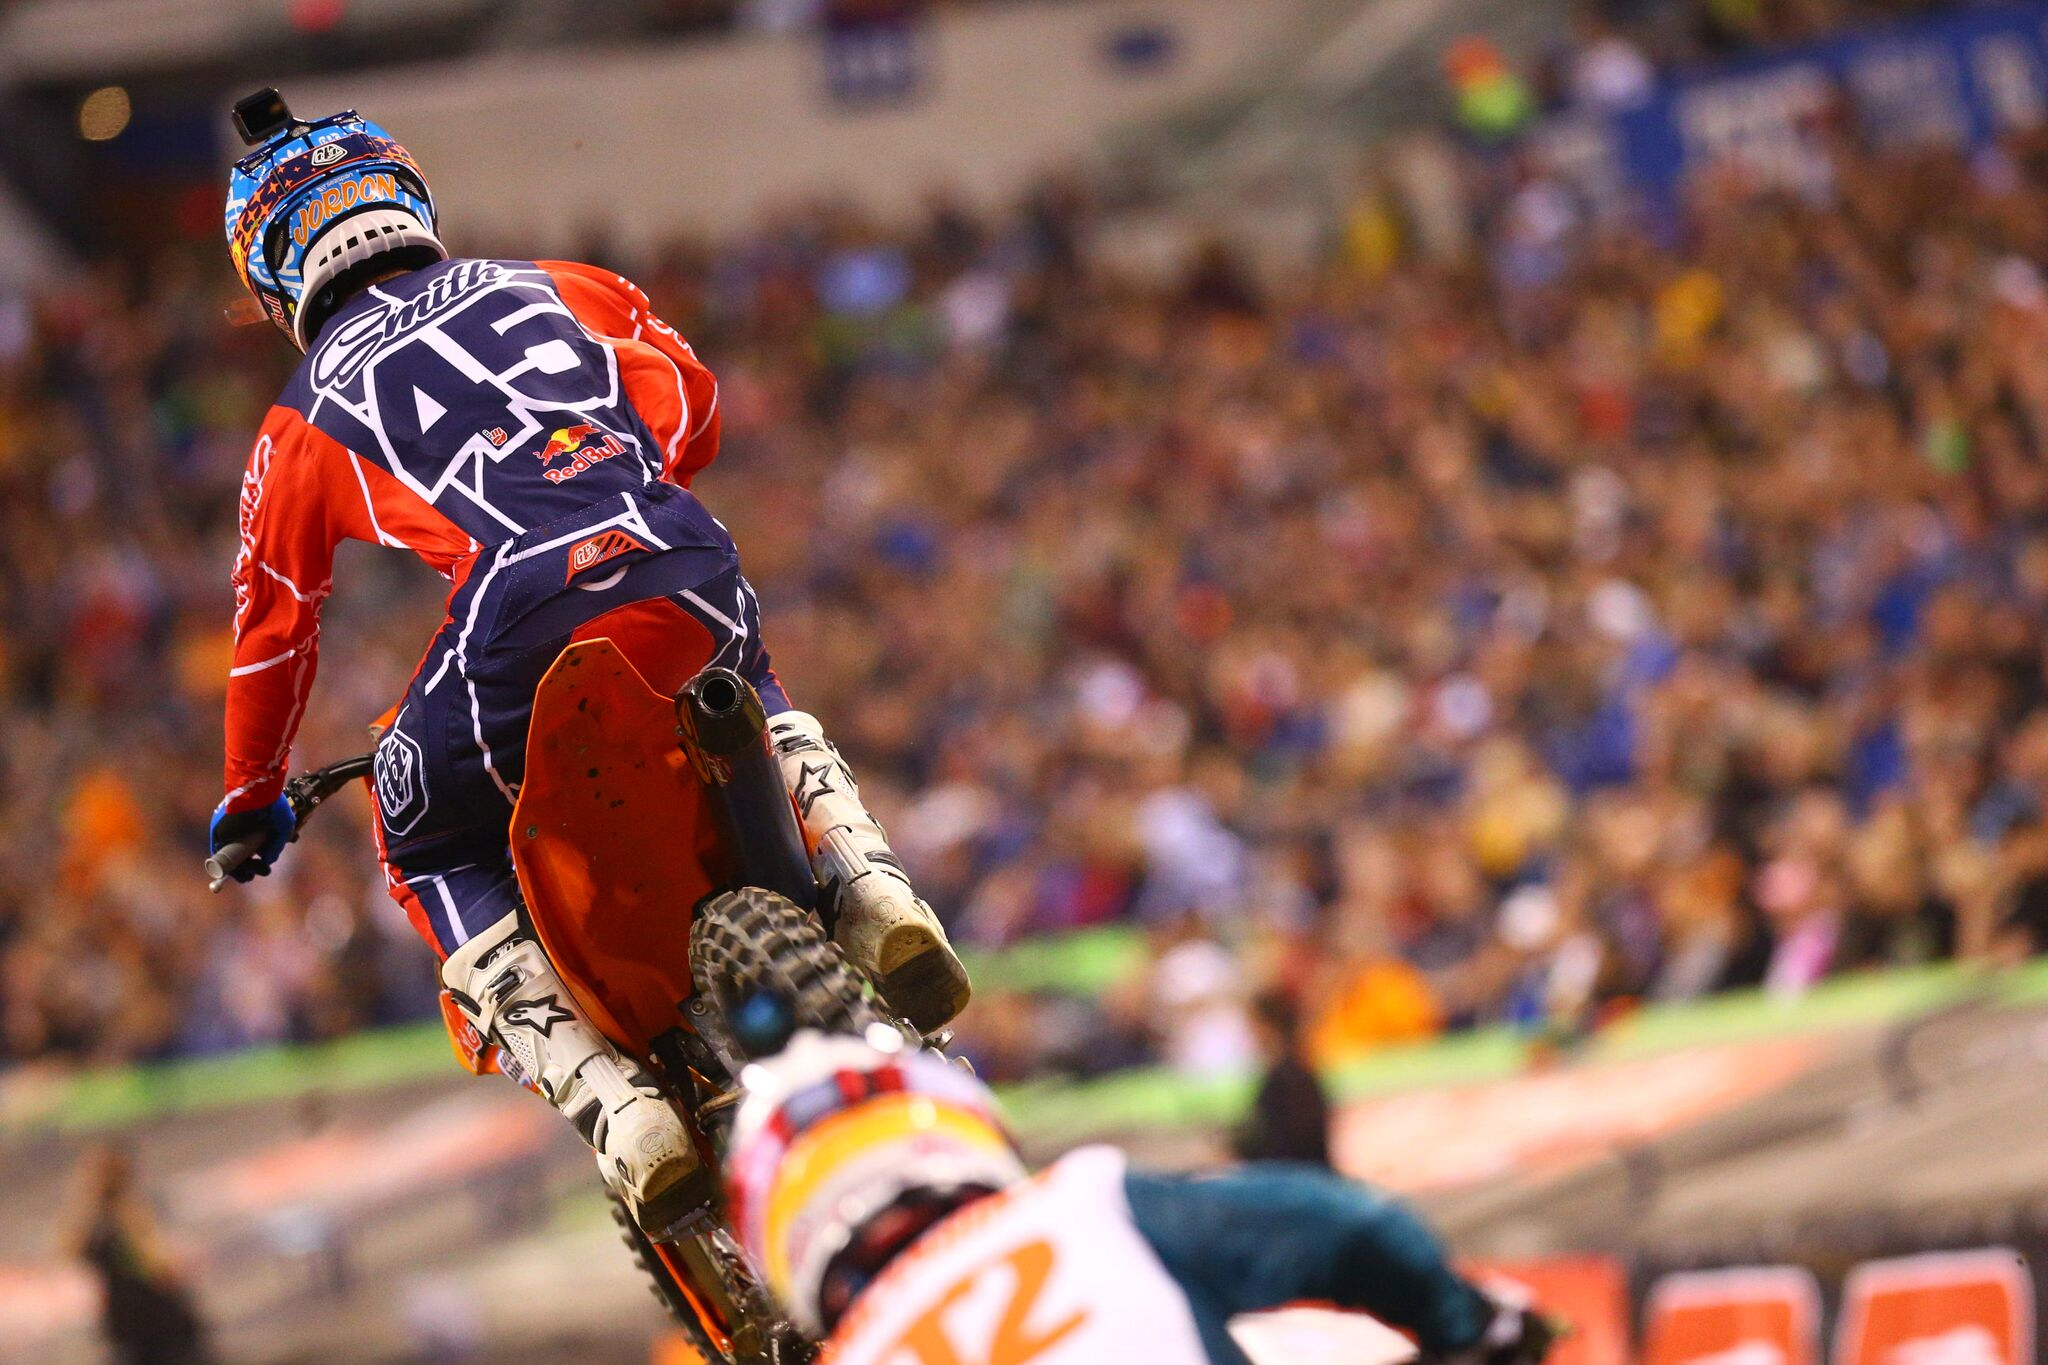 Troy Lee Designs-Red Bull-KTM’s Smith Tightens Points Battle With Fourth Place at Indianapolis Showdown